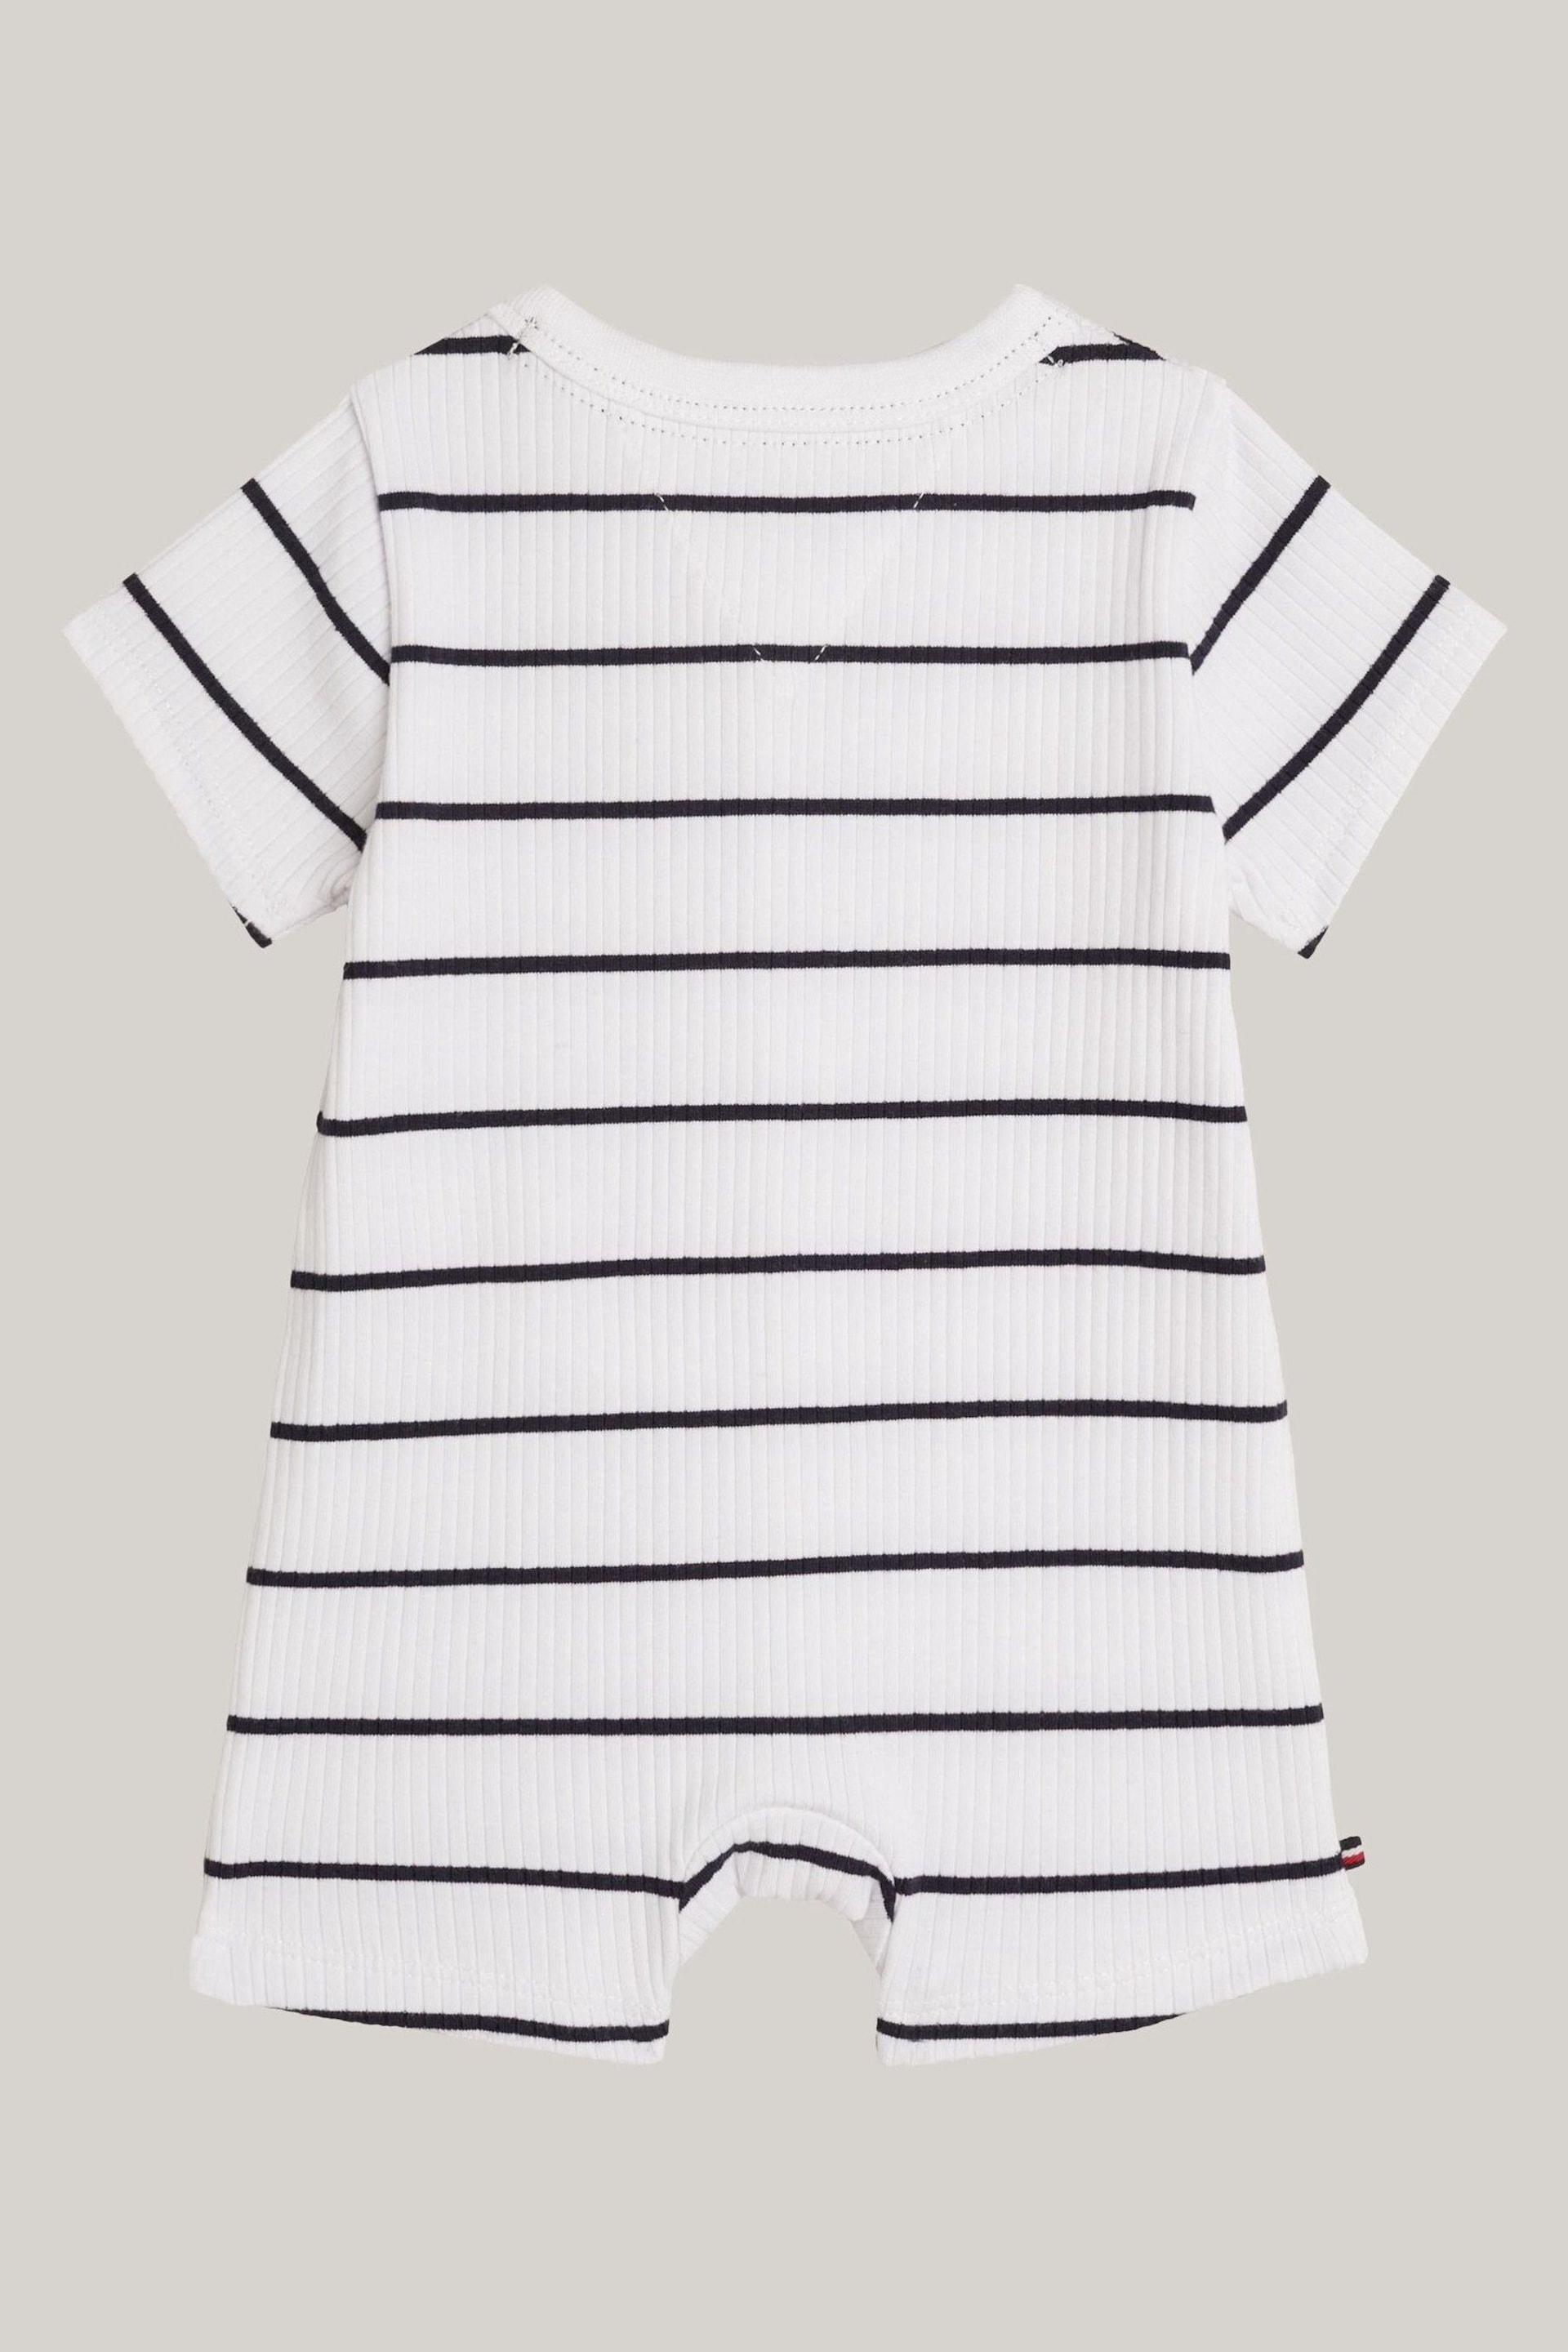 Tommy Hilfiger Baby Blue Striped Rib Shortall All In One - Image 2 of 3